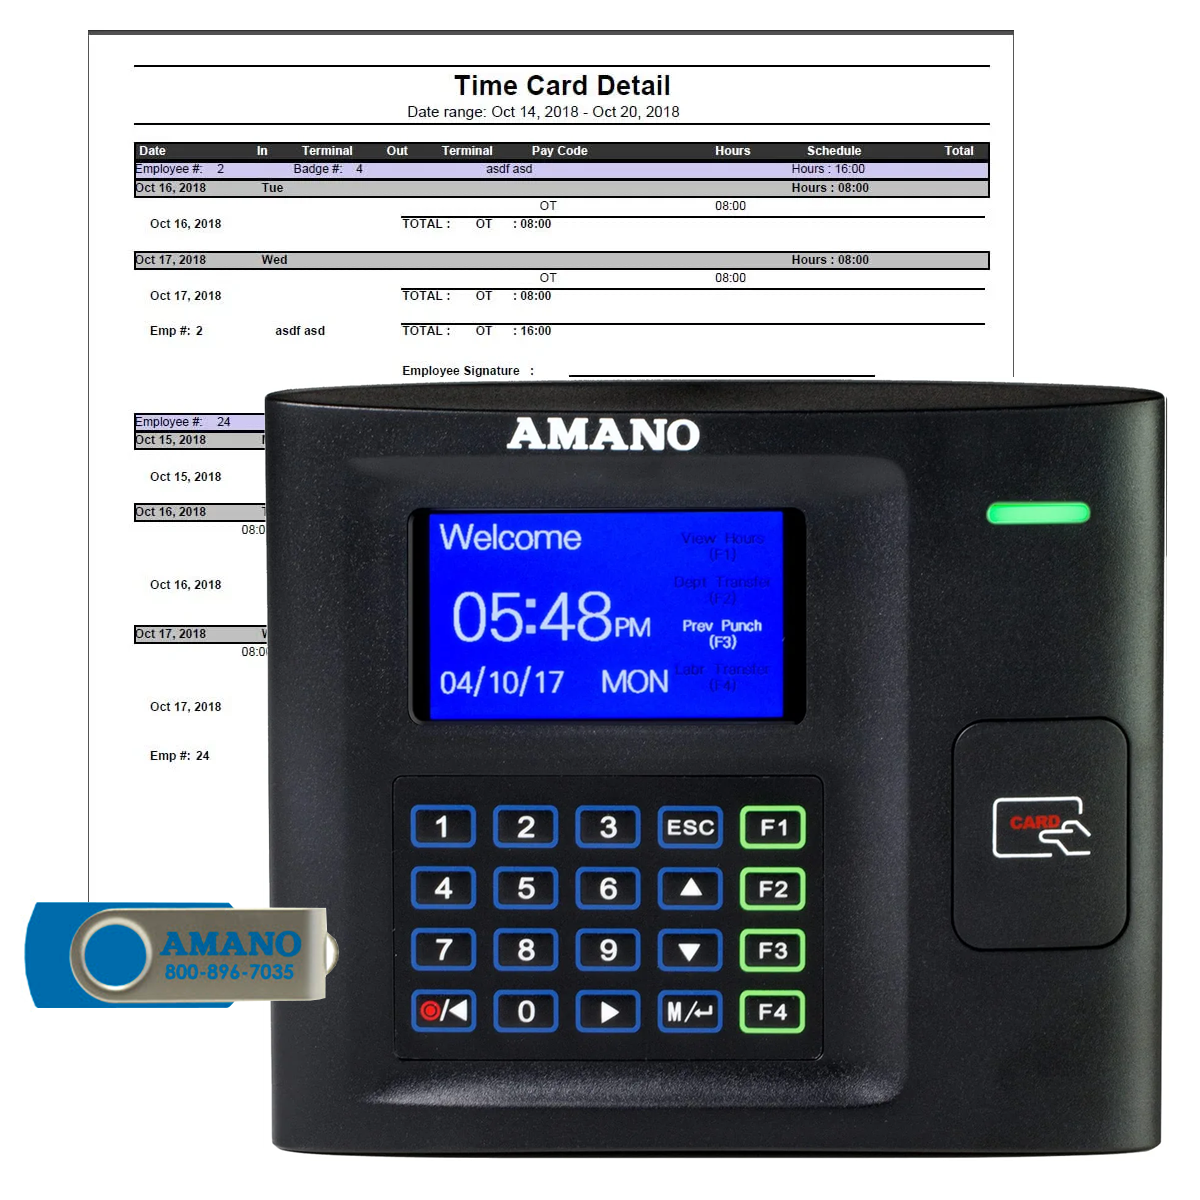 Amano MTX-30P/A974 Time Clock System